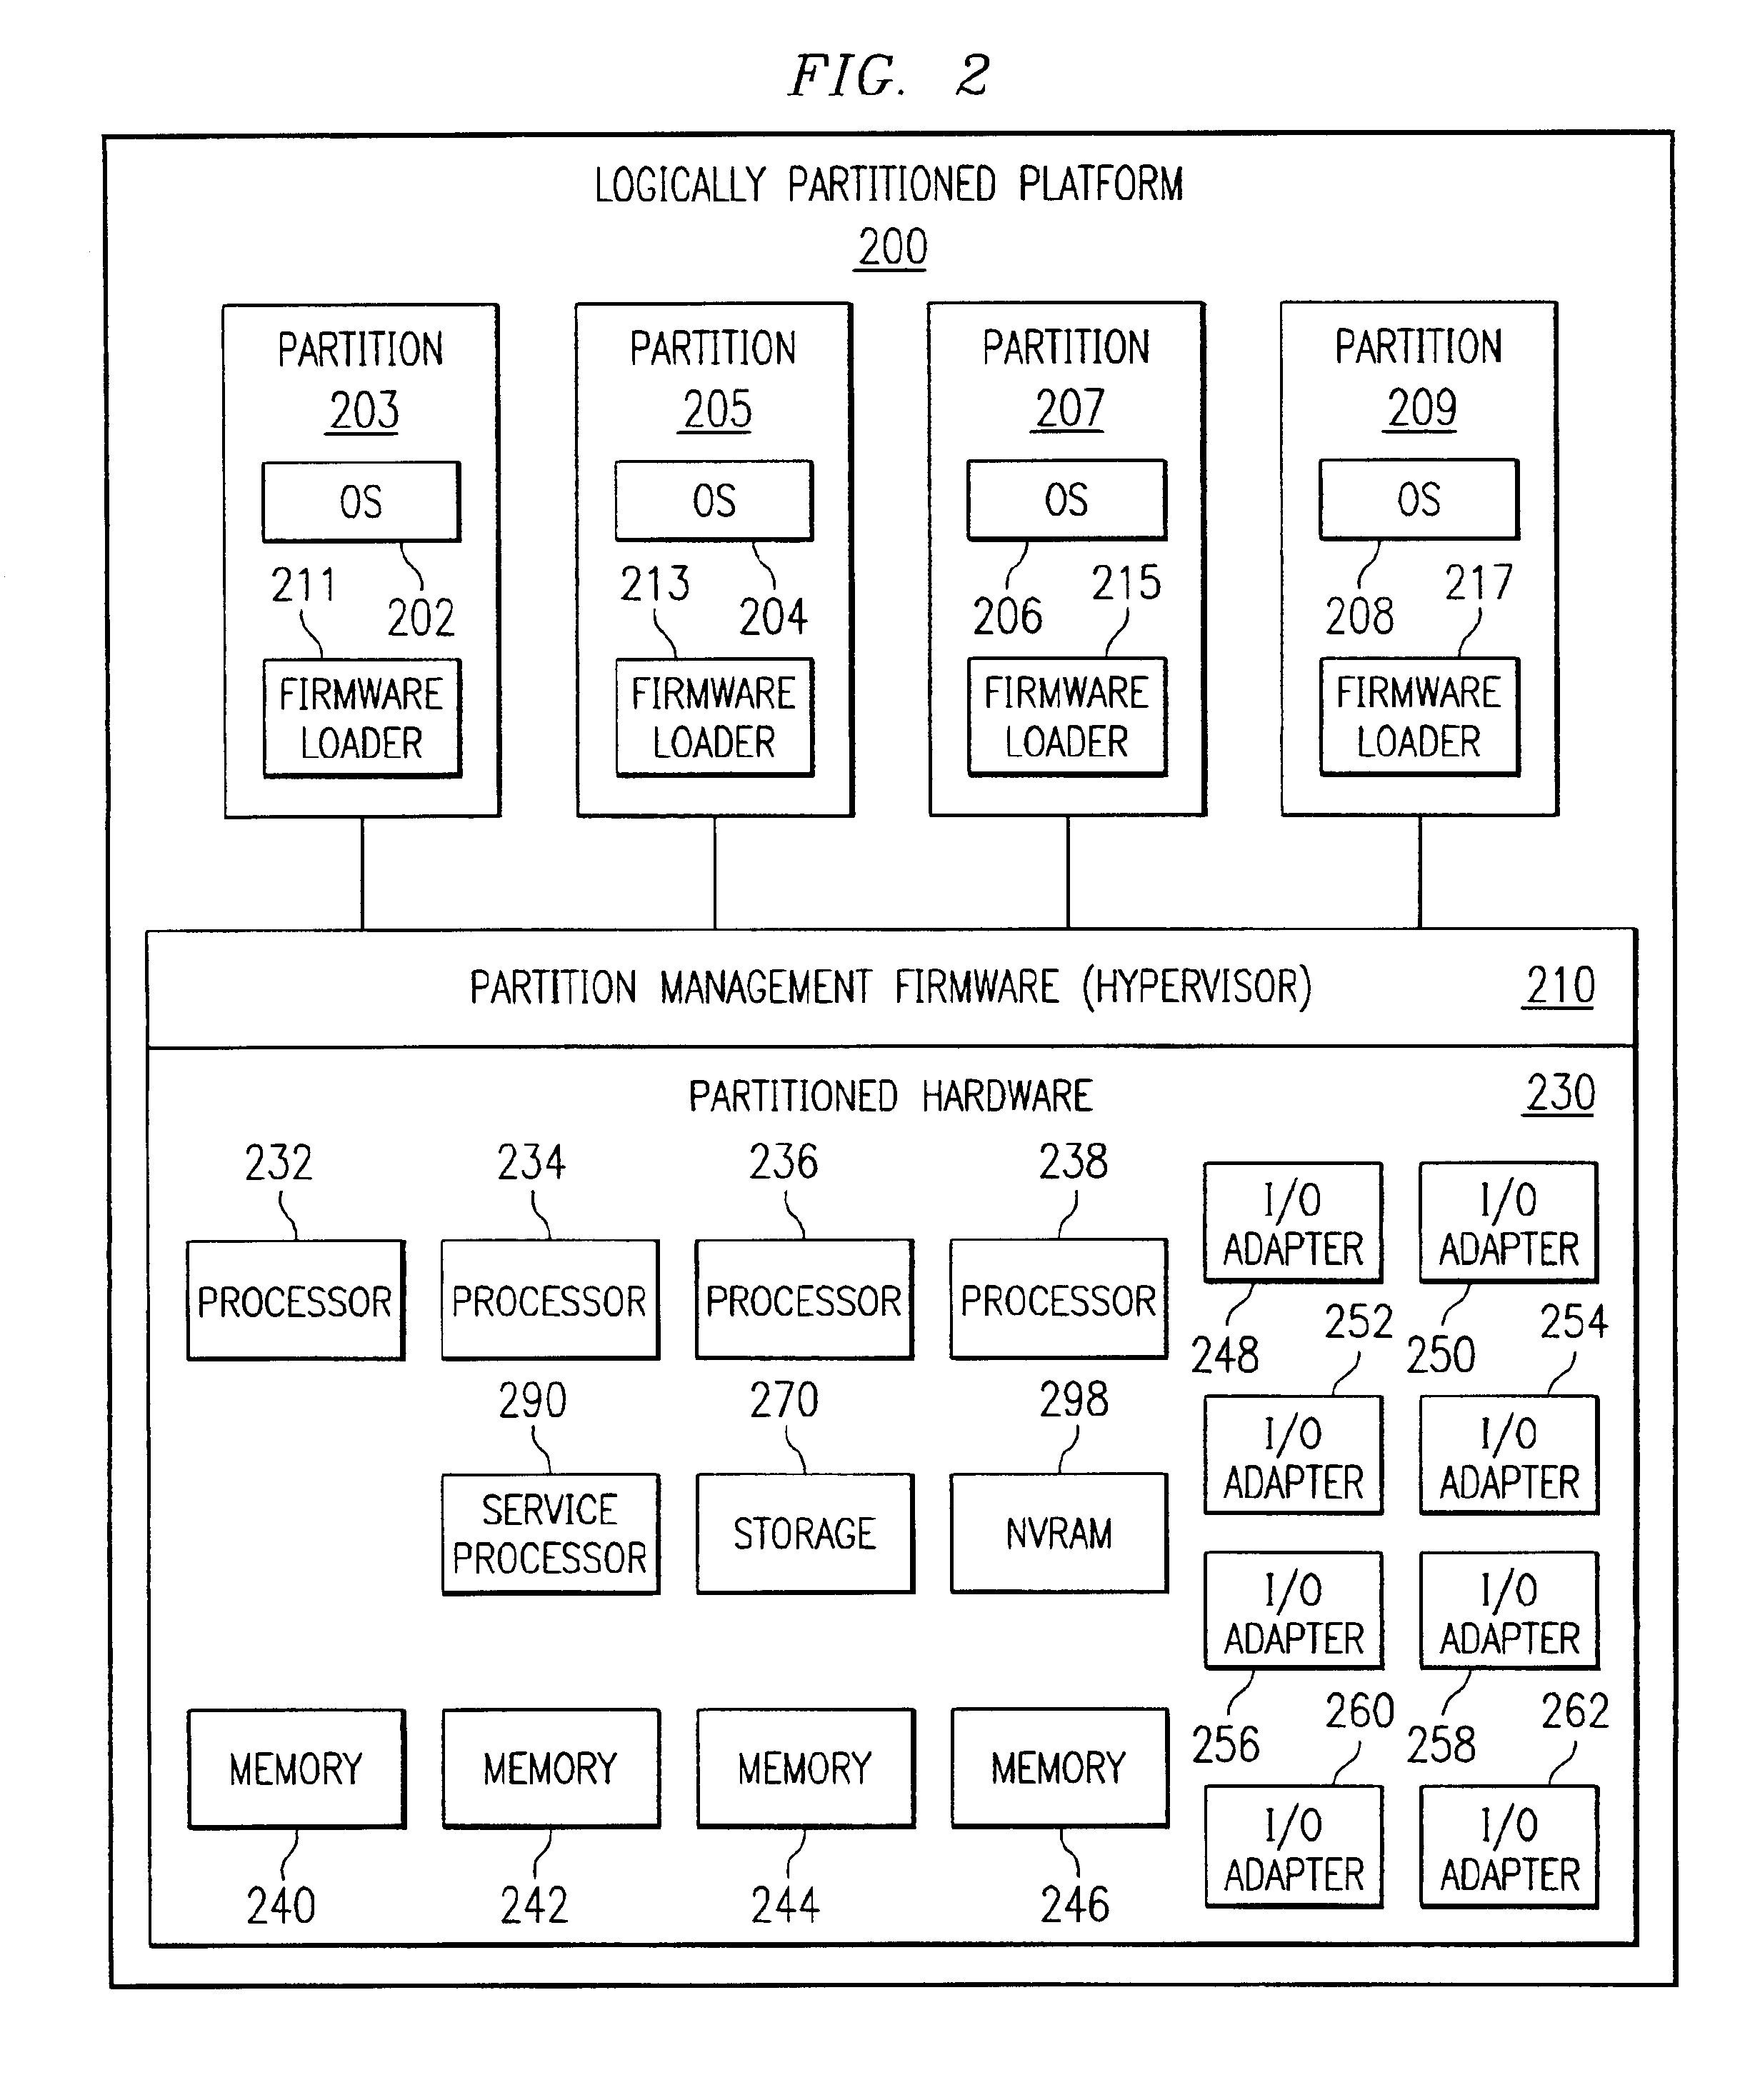 Method and apparatus for preventing the propagation of input/output errors in a logical partitioned data processing system